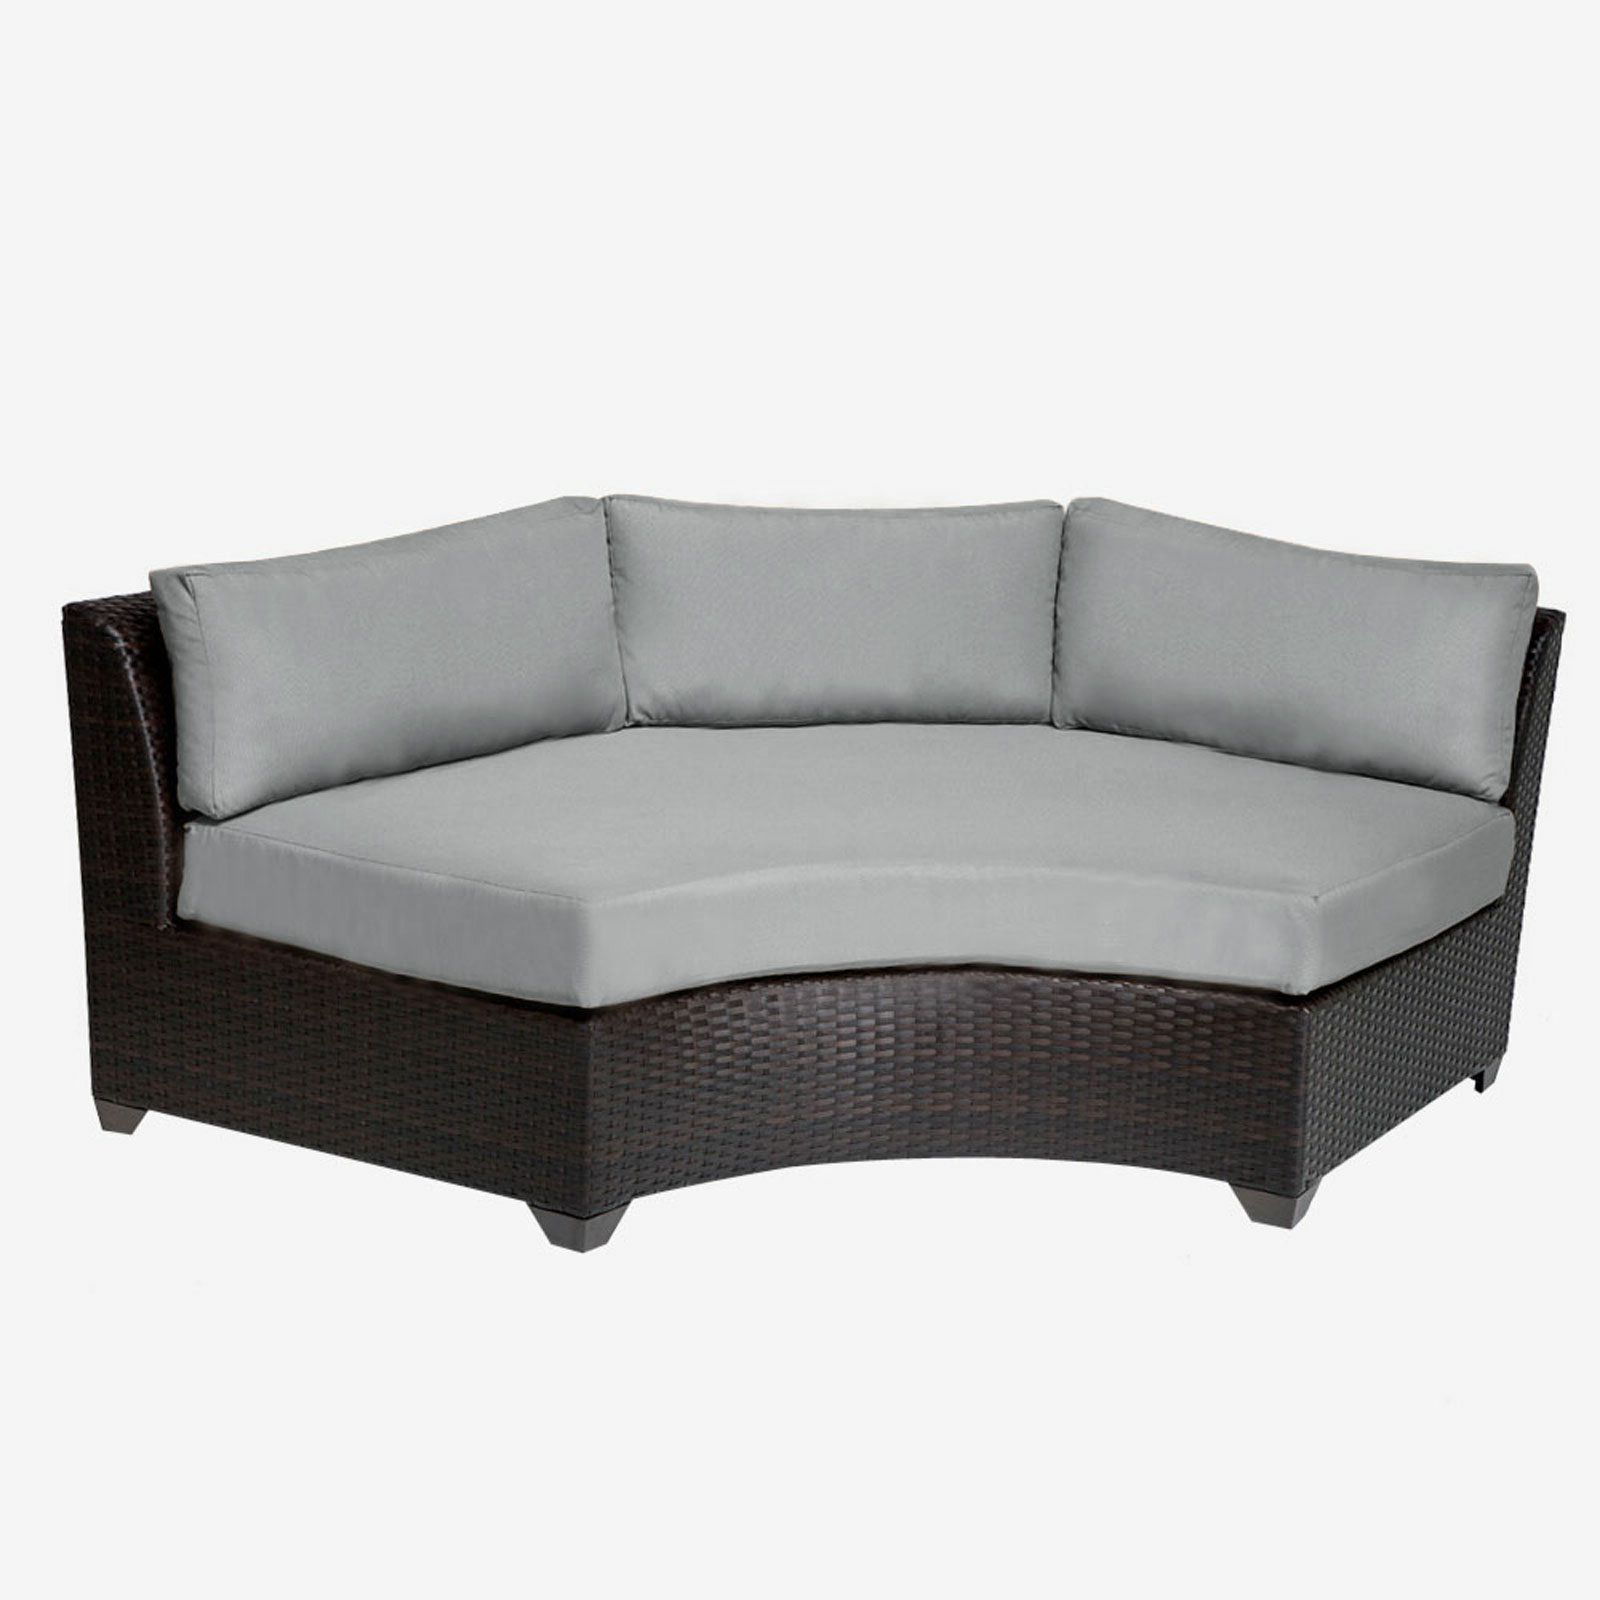 Most Recent Tegan Patio Sofas With Cushions Throughout Sol 72 Outdoor Tegan Patio Sofa With Cushions (View 11 of 25)